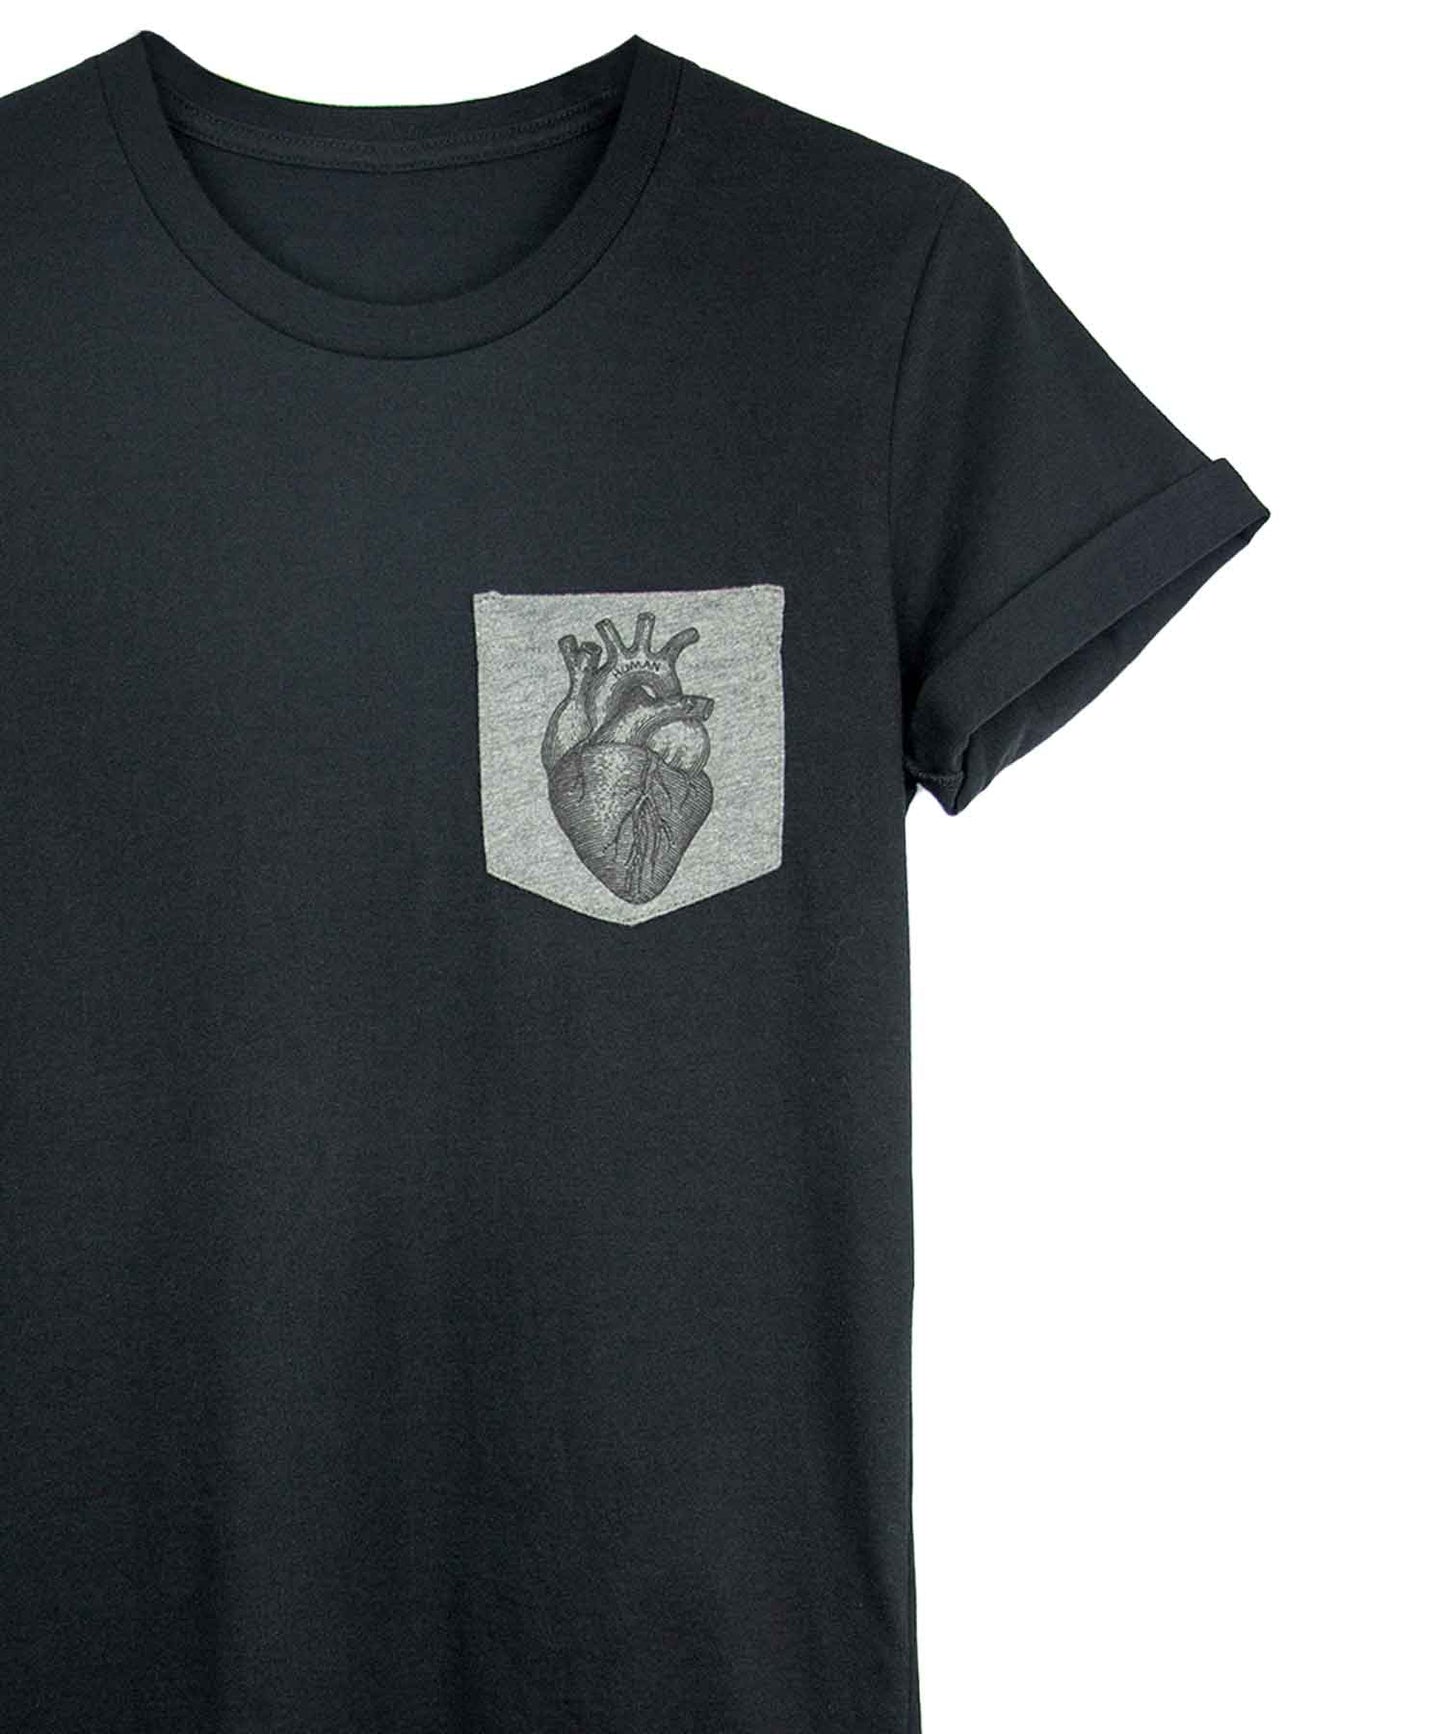 Androgynous Fox black pocket tee with grey pocket featuring an anatomical heart print. 